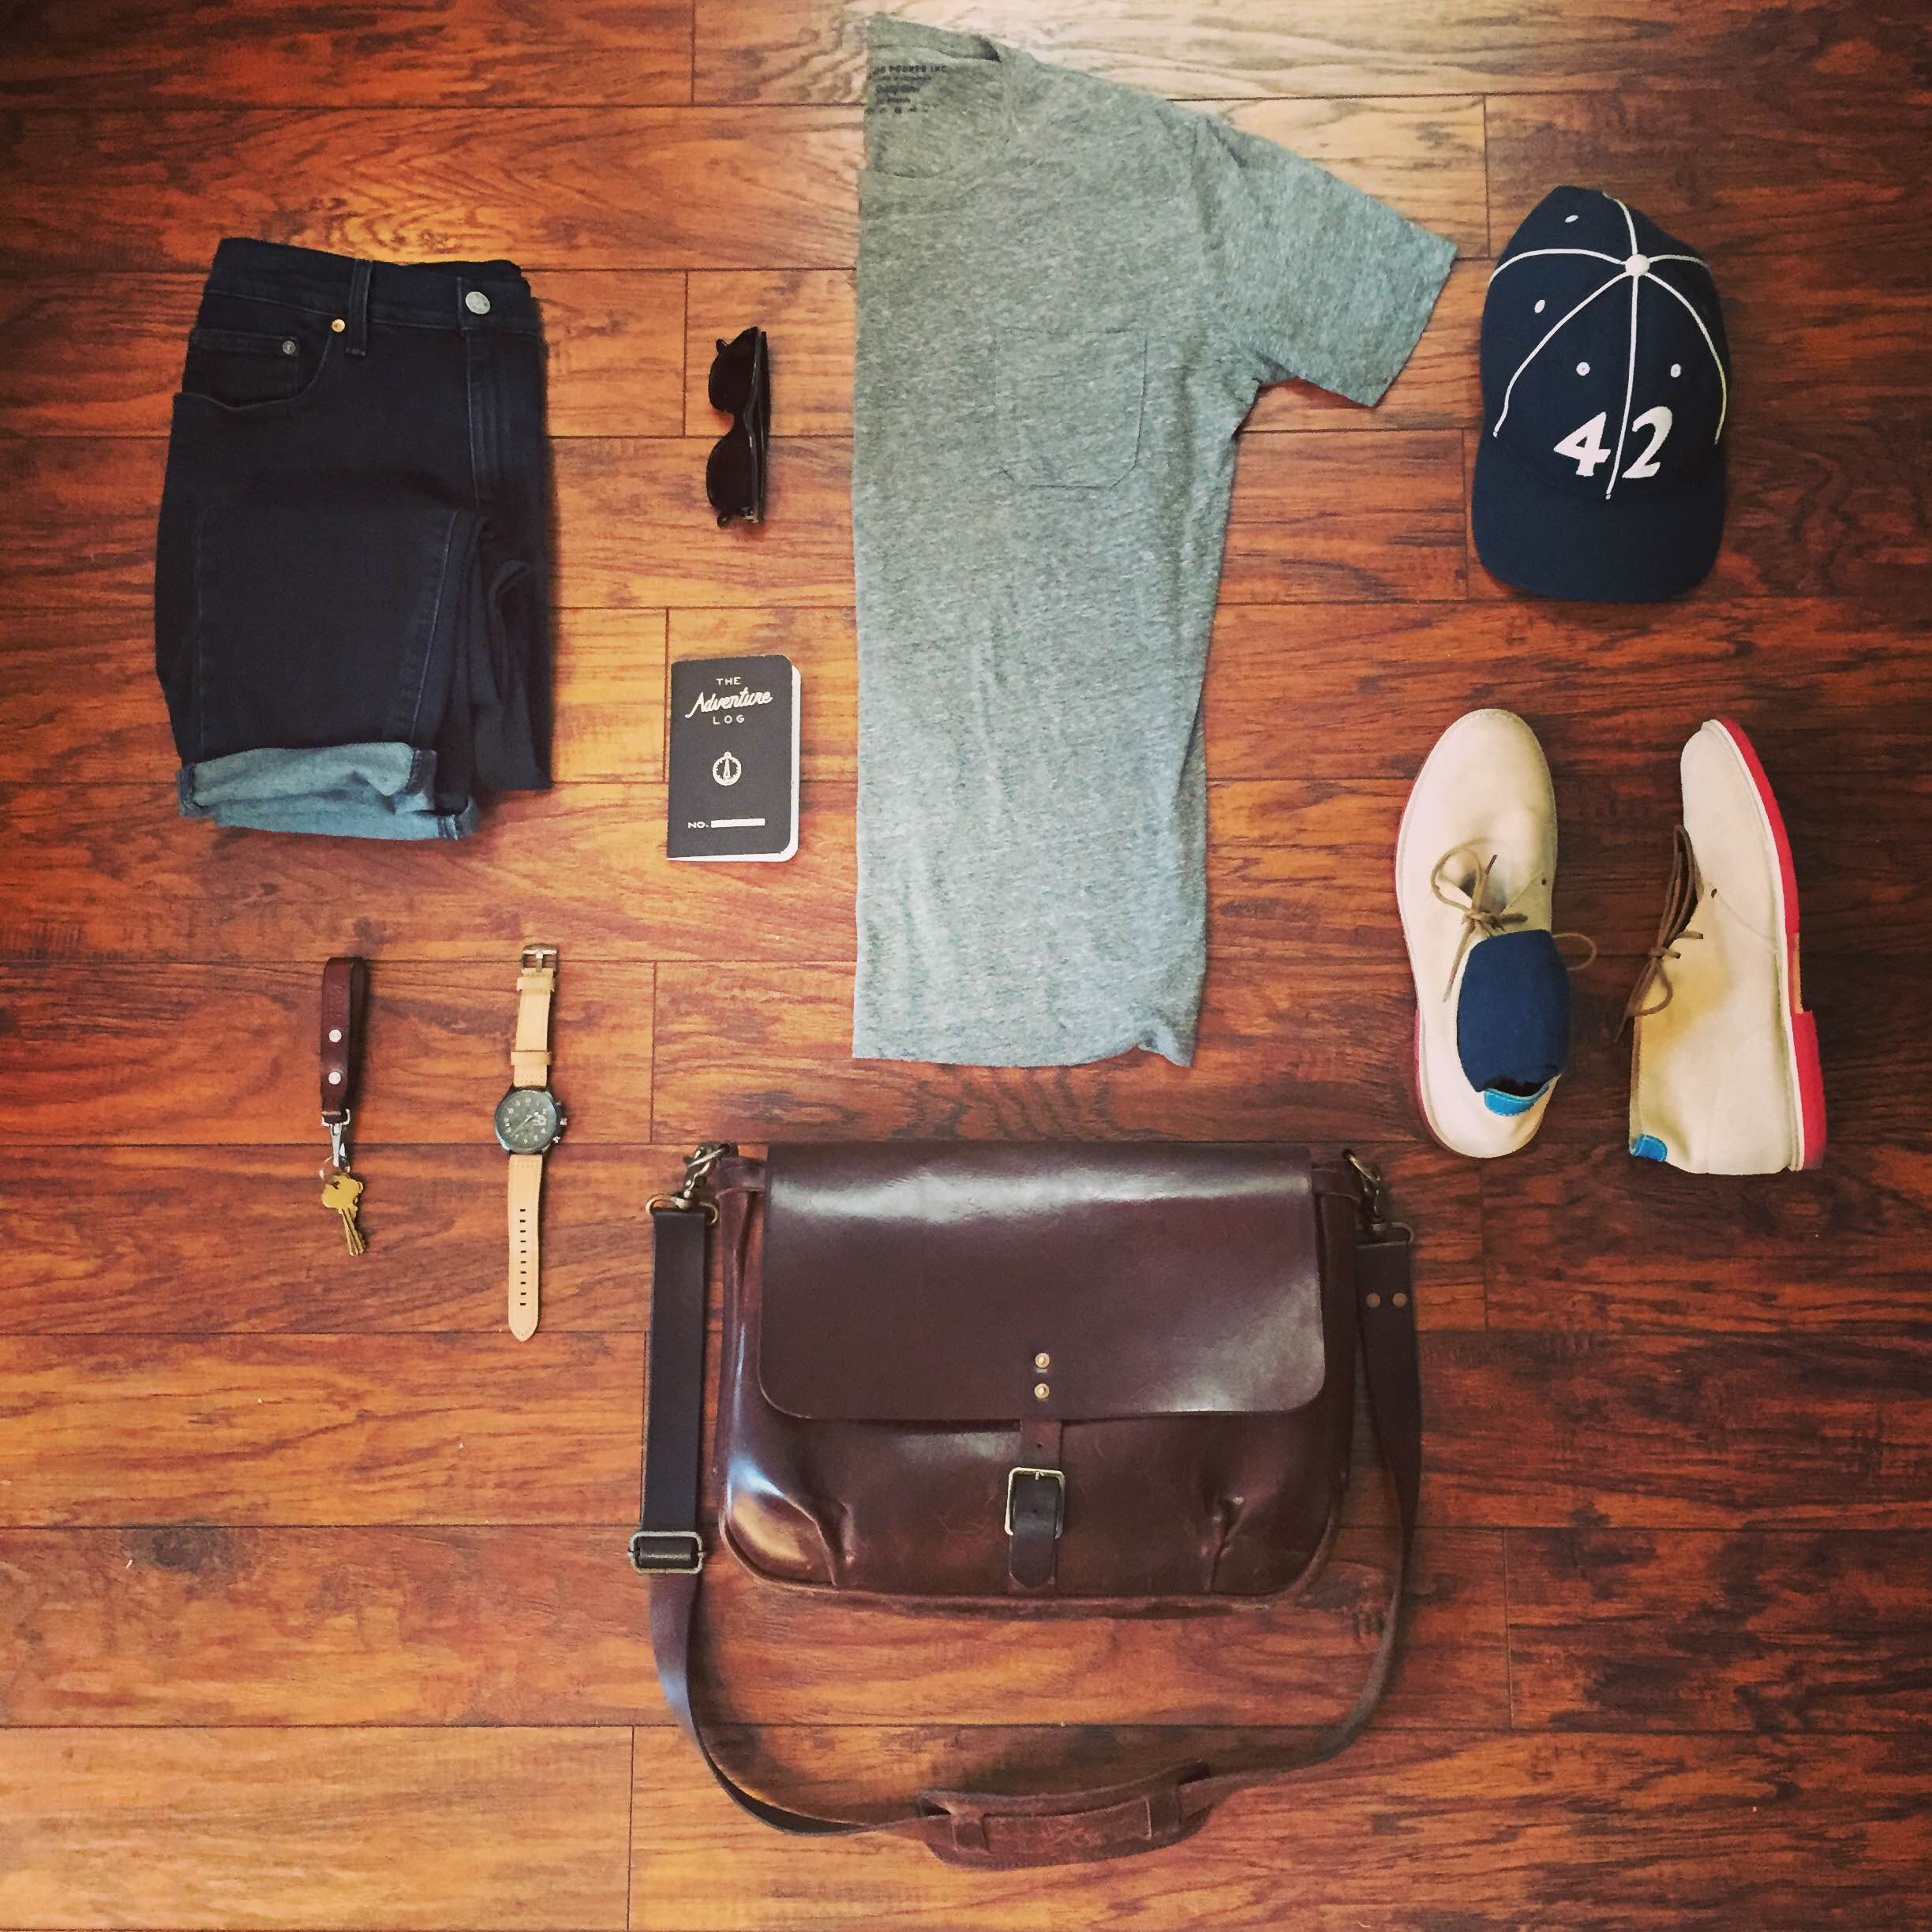 A casual, comfortable Friday travel outfit. Slim Mailbag by Satchel & Page. T-shirt in Heather Grey and Colorblocked Socks by Richer Poorer. Slim Staple Denim by Mott & Bow. Tan Suede Chukkas by Blu Kicks. Hawker Hunter II Watch by AVI-8. Vintage ballcap by Goorin Brothers. Leather lanyard by Tanner Goods. Sunglasses by Steven Alan Optical. Adventure Log by Word Notebooks.